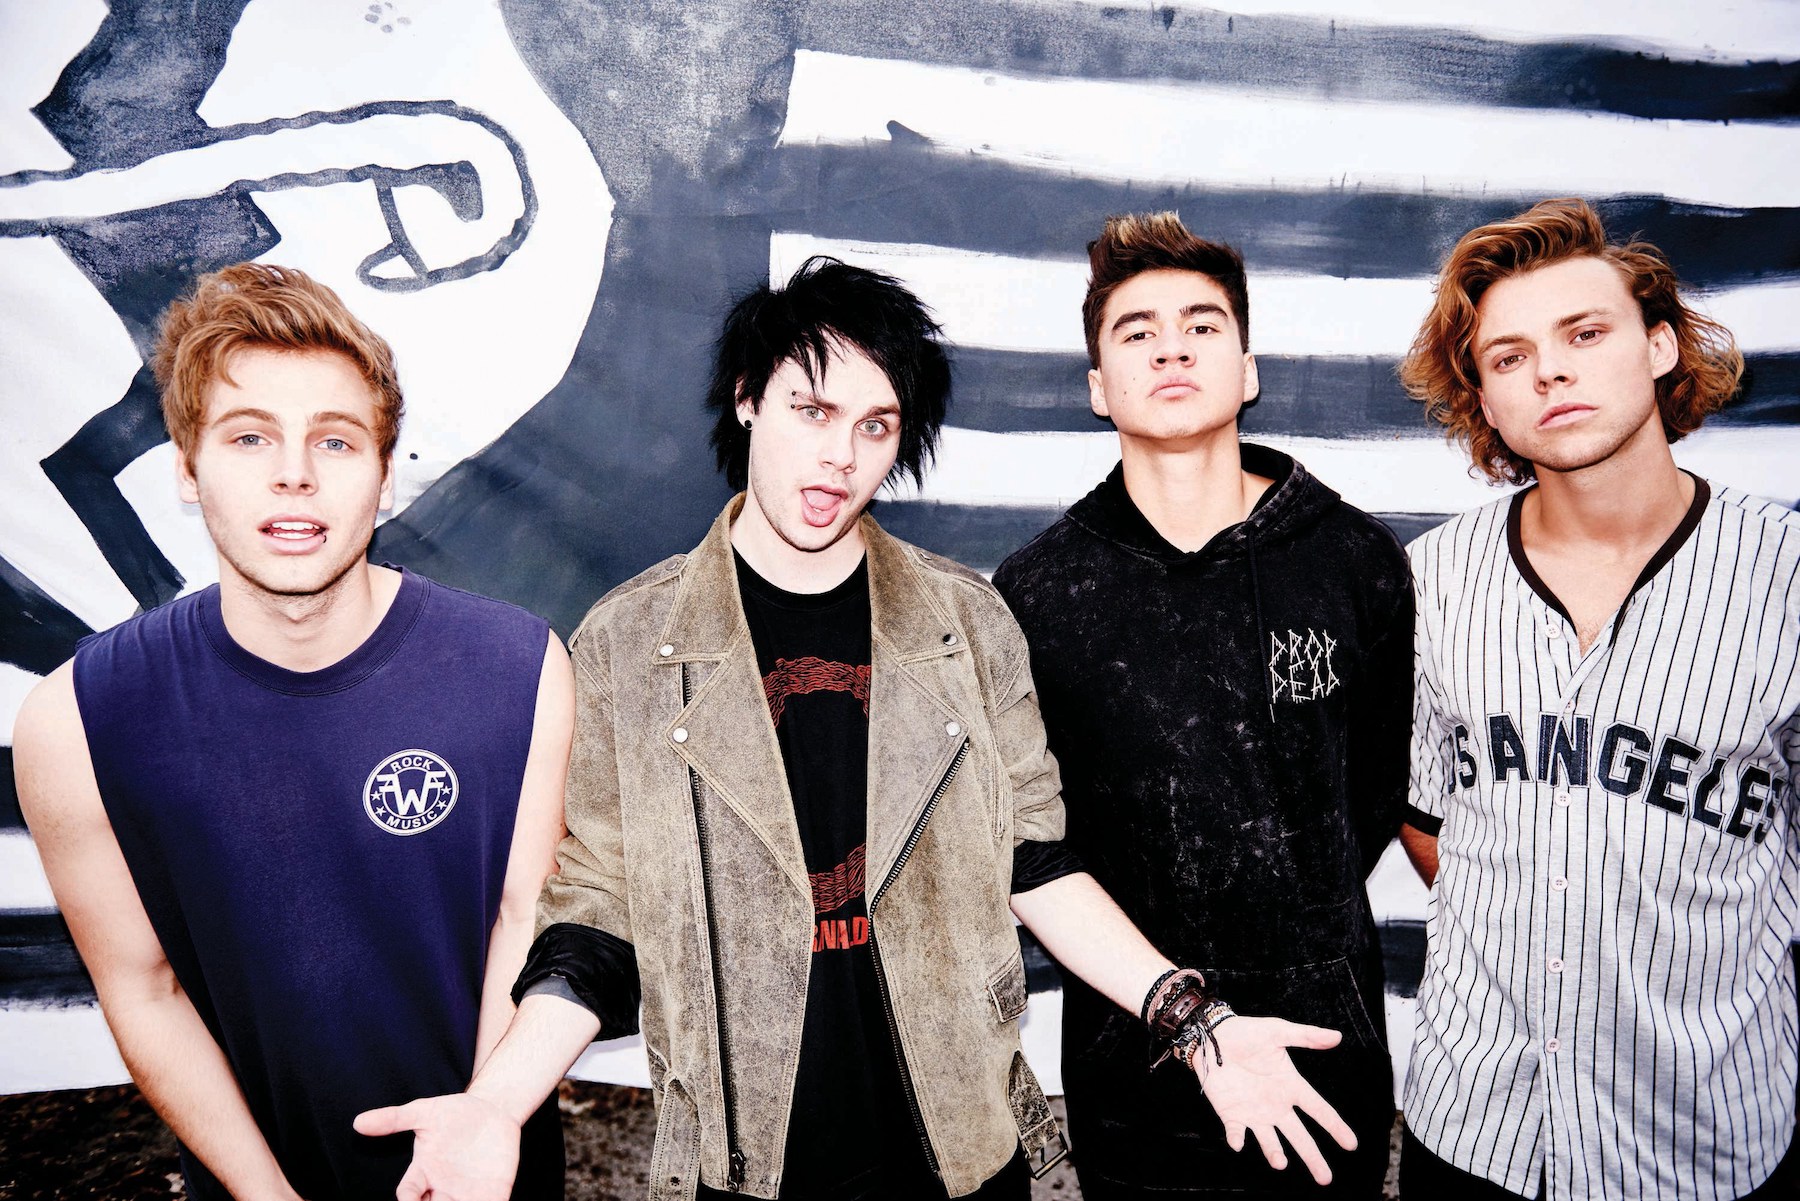 5 Seconds of Summer land first US Top 10 single